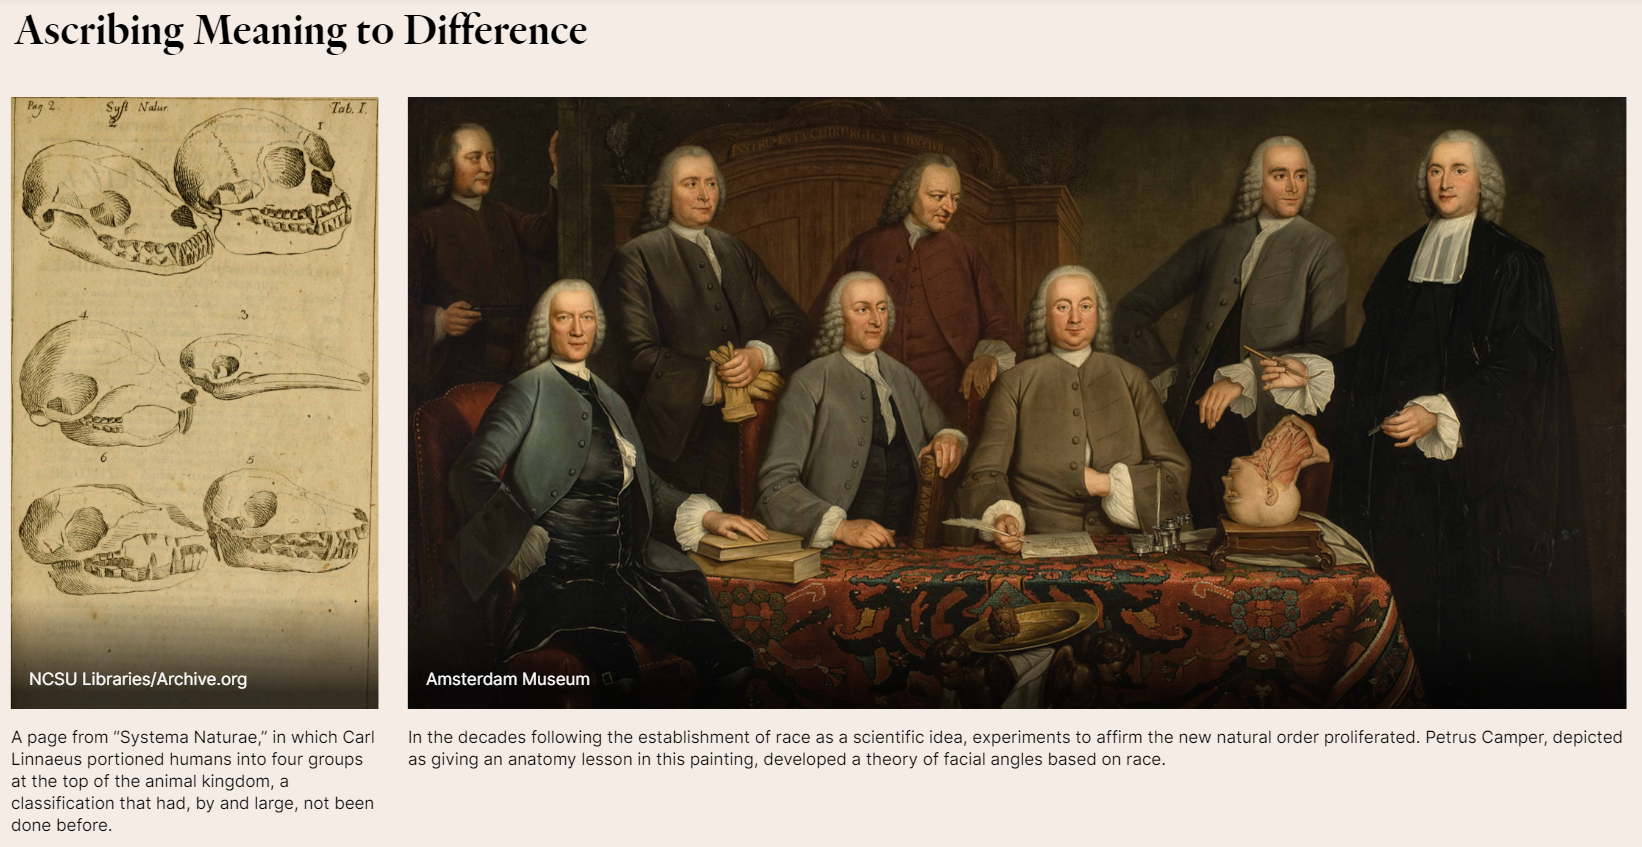 Part one of an image gallery titled, "Ascribing Meaning to Difference." The first image shows diagrams of skulls, by Carl Linnaeus, with clear differences between different "groups" of humans. The second shows a group of white scholars gathered around an ornate table, with a bust of a human head sitting on one side.